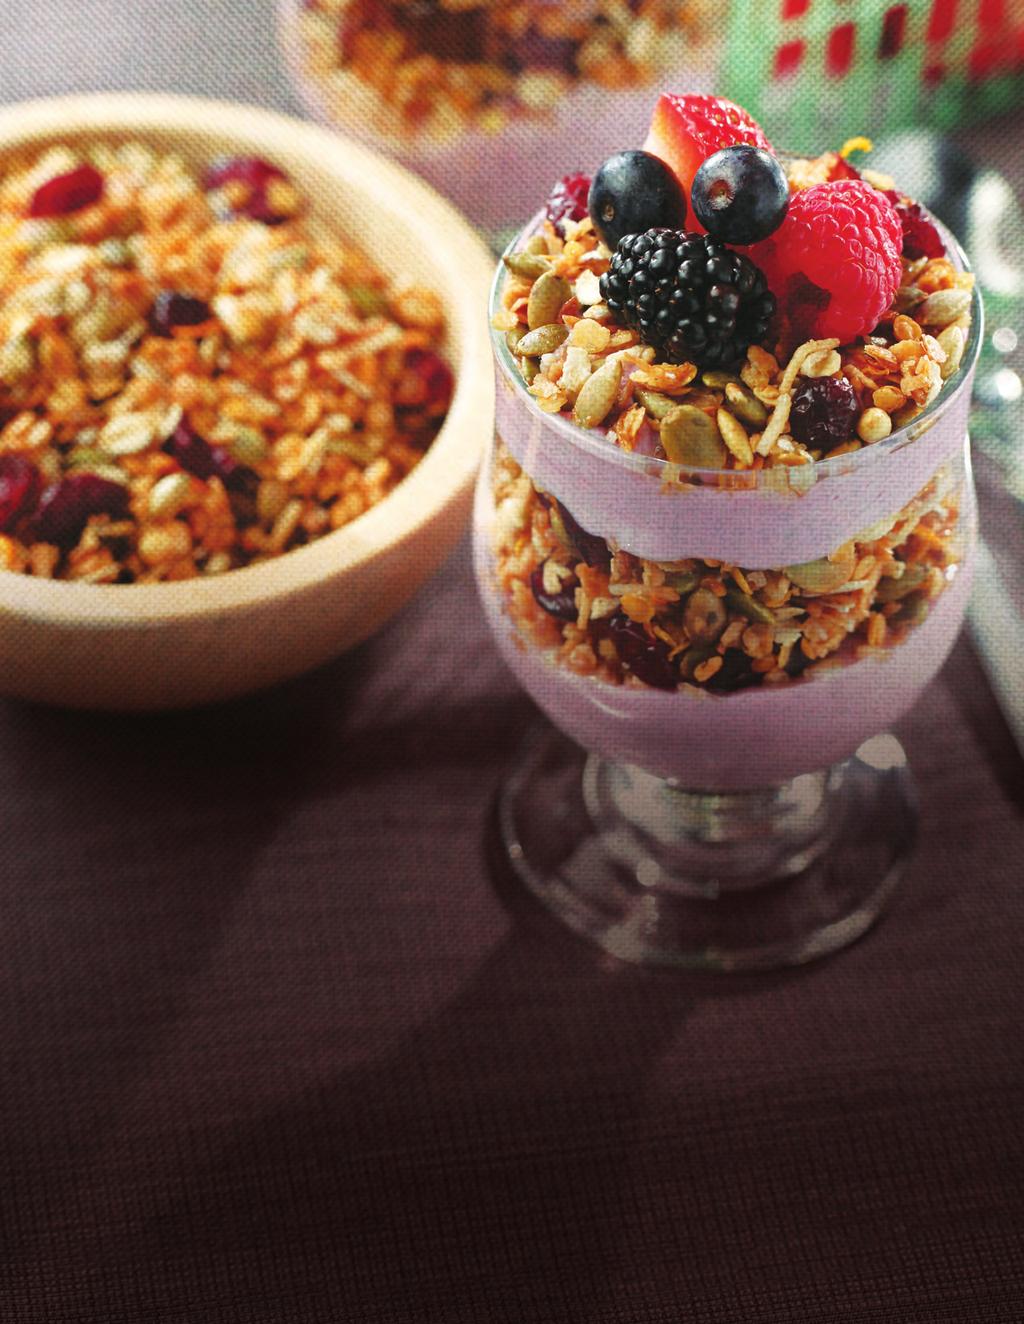 TIP: Make extra granola and bring it along on a hike, to work, to school, or have it as a quick snack before bed!